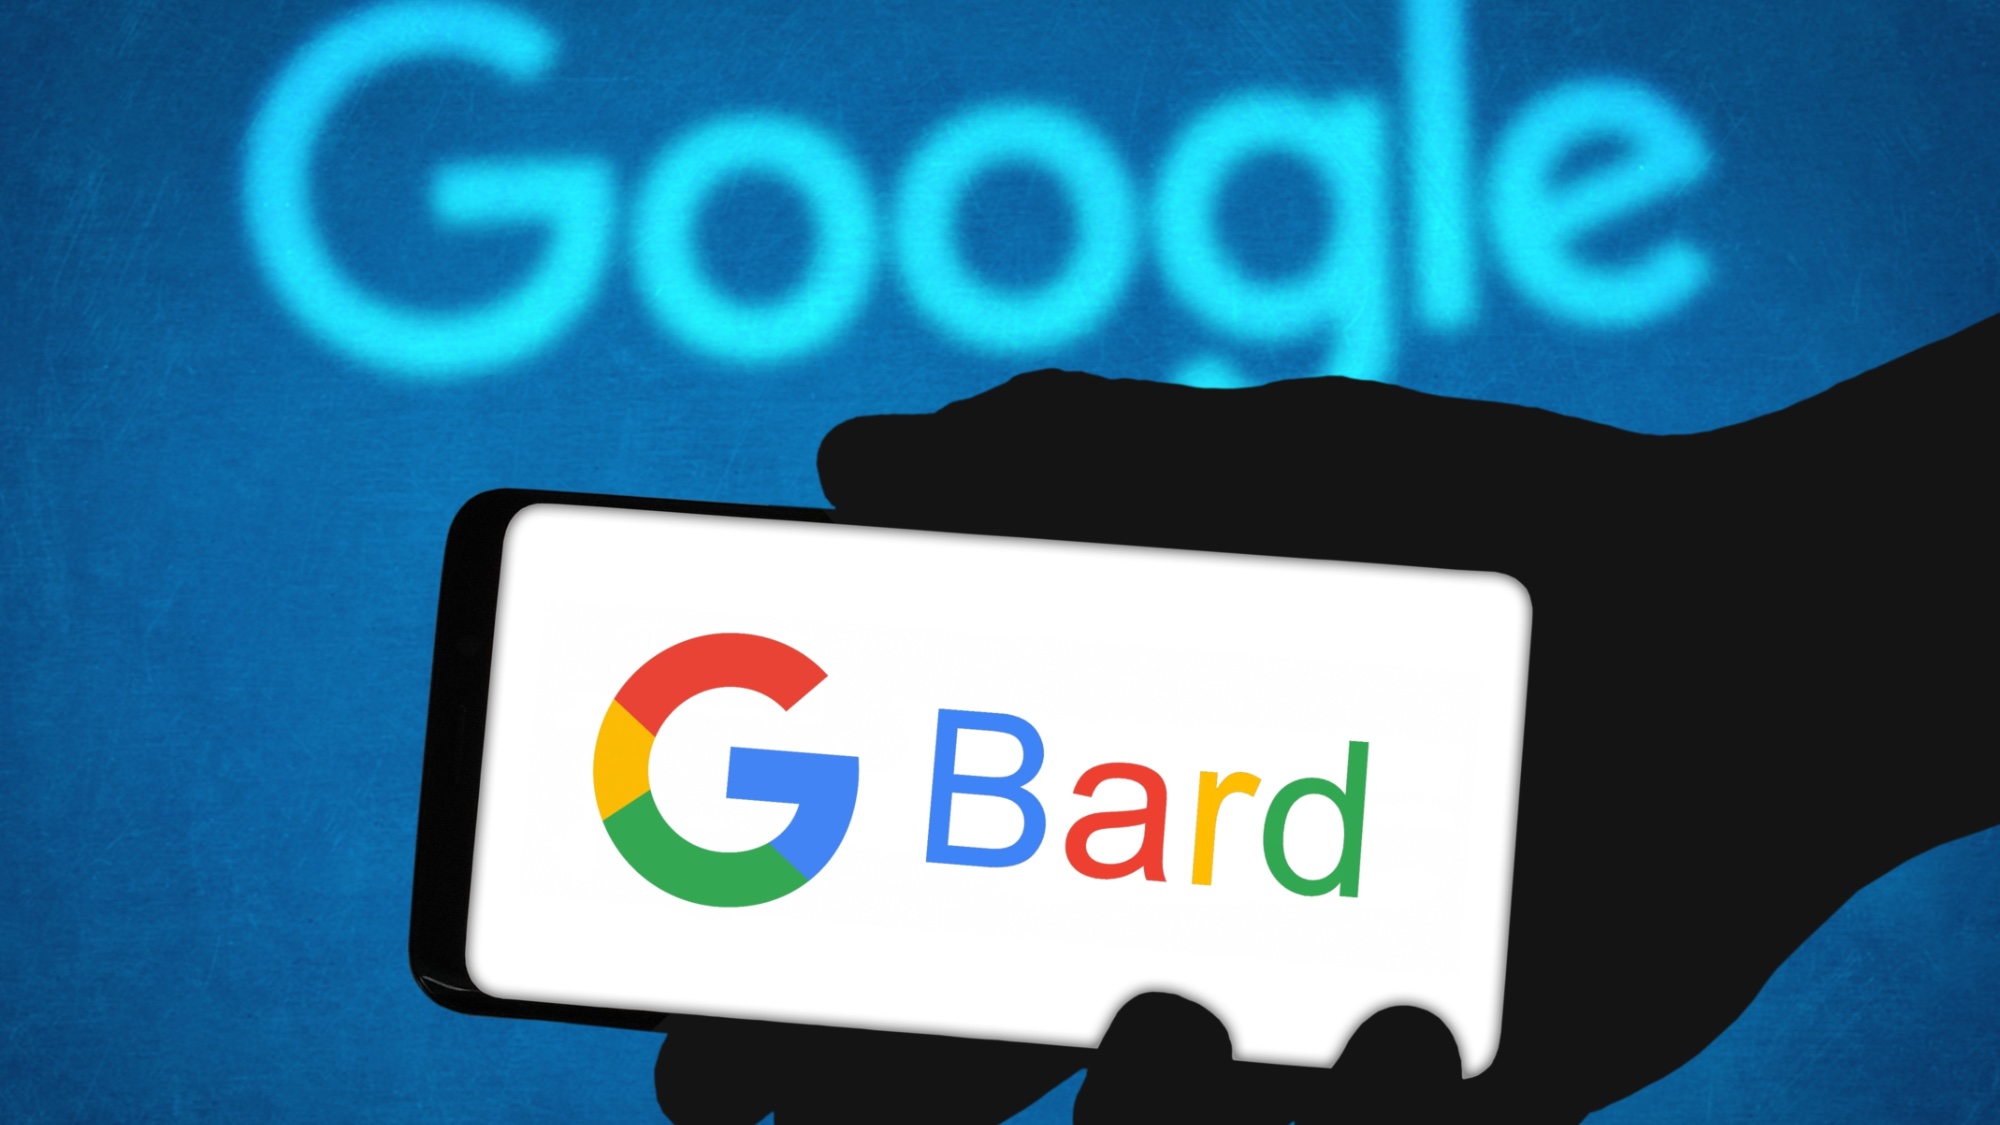 Google Bard AI mistake just cost Google over $100 billion | Tom's Guide